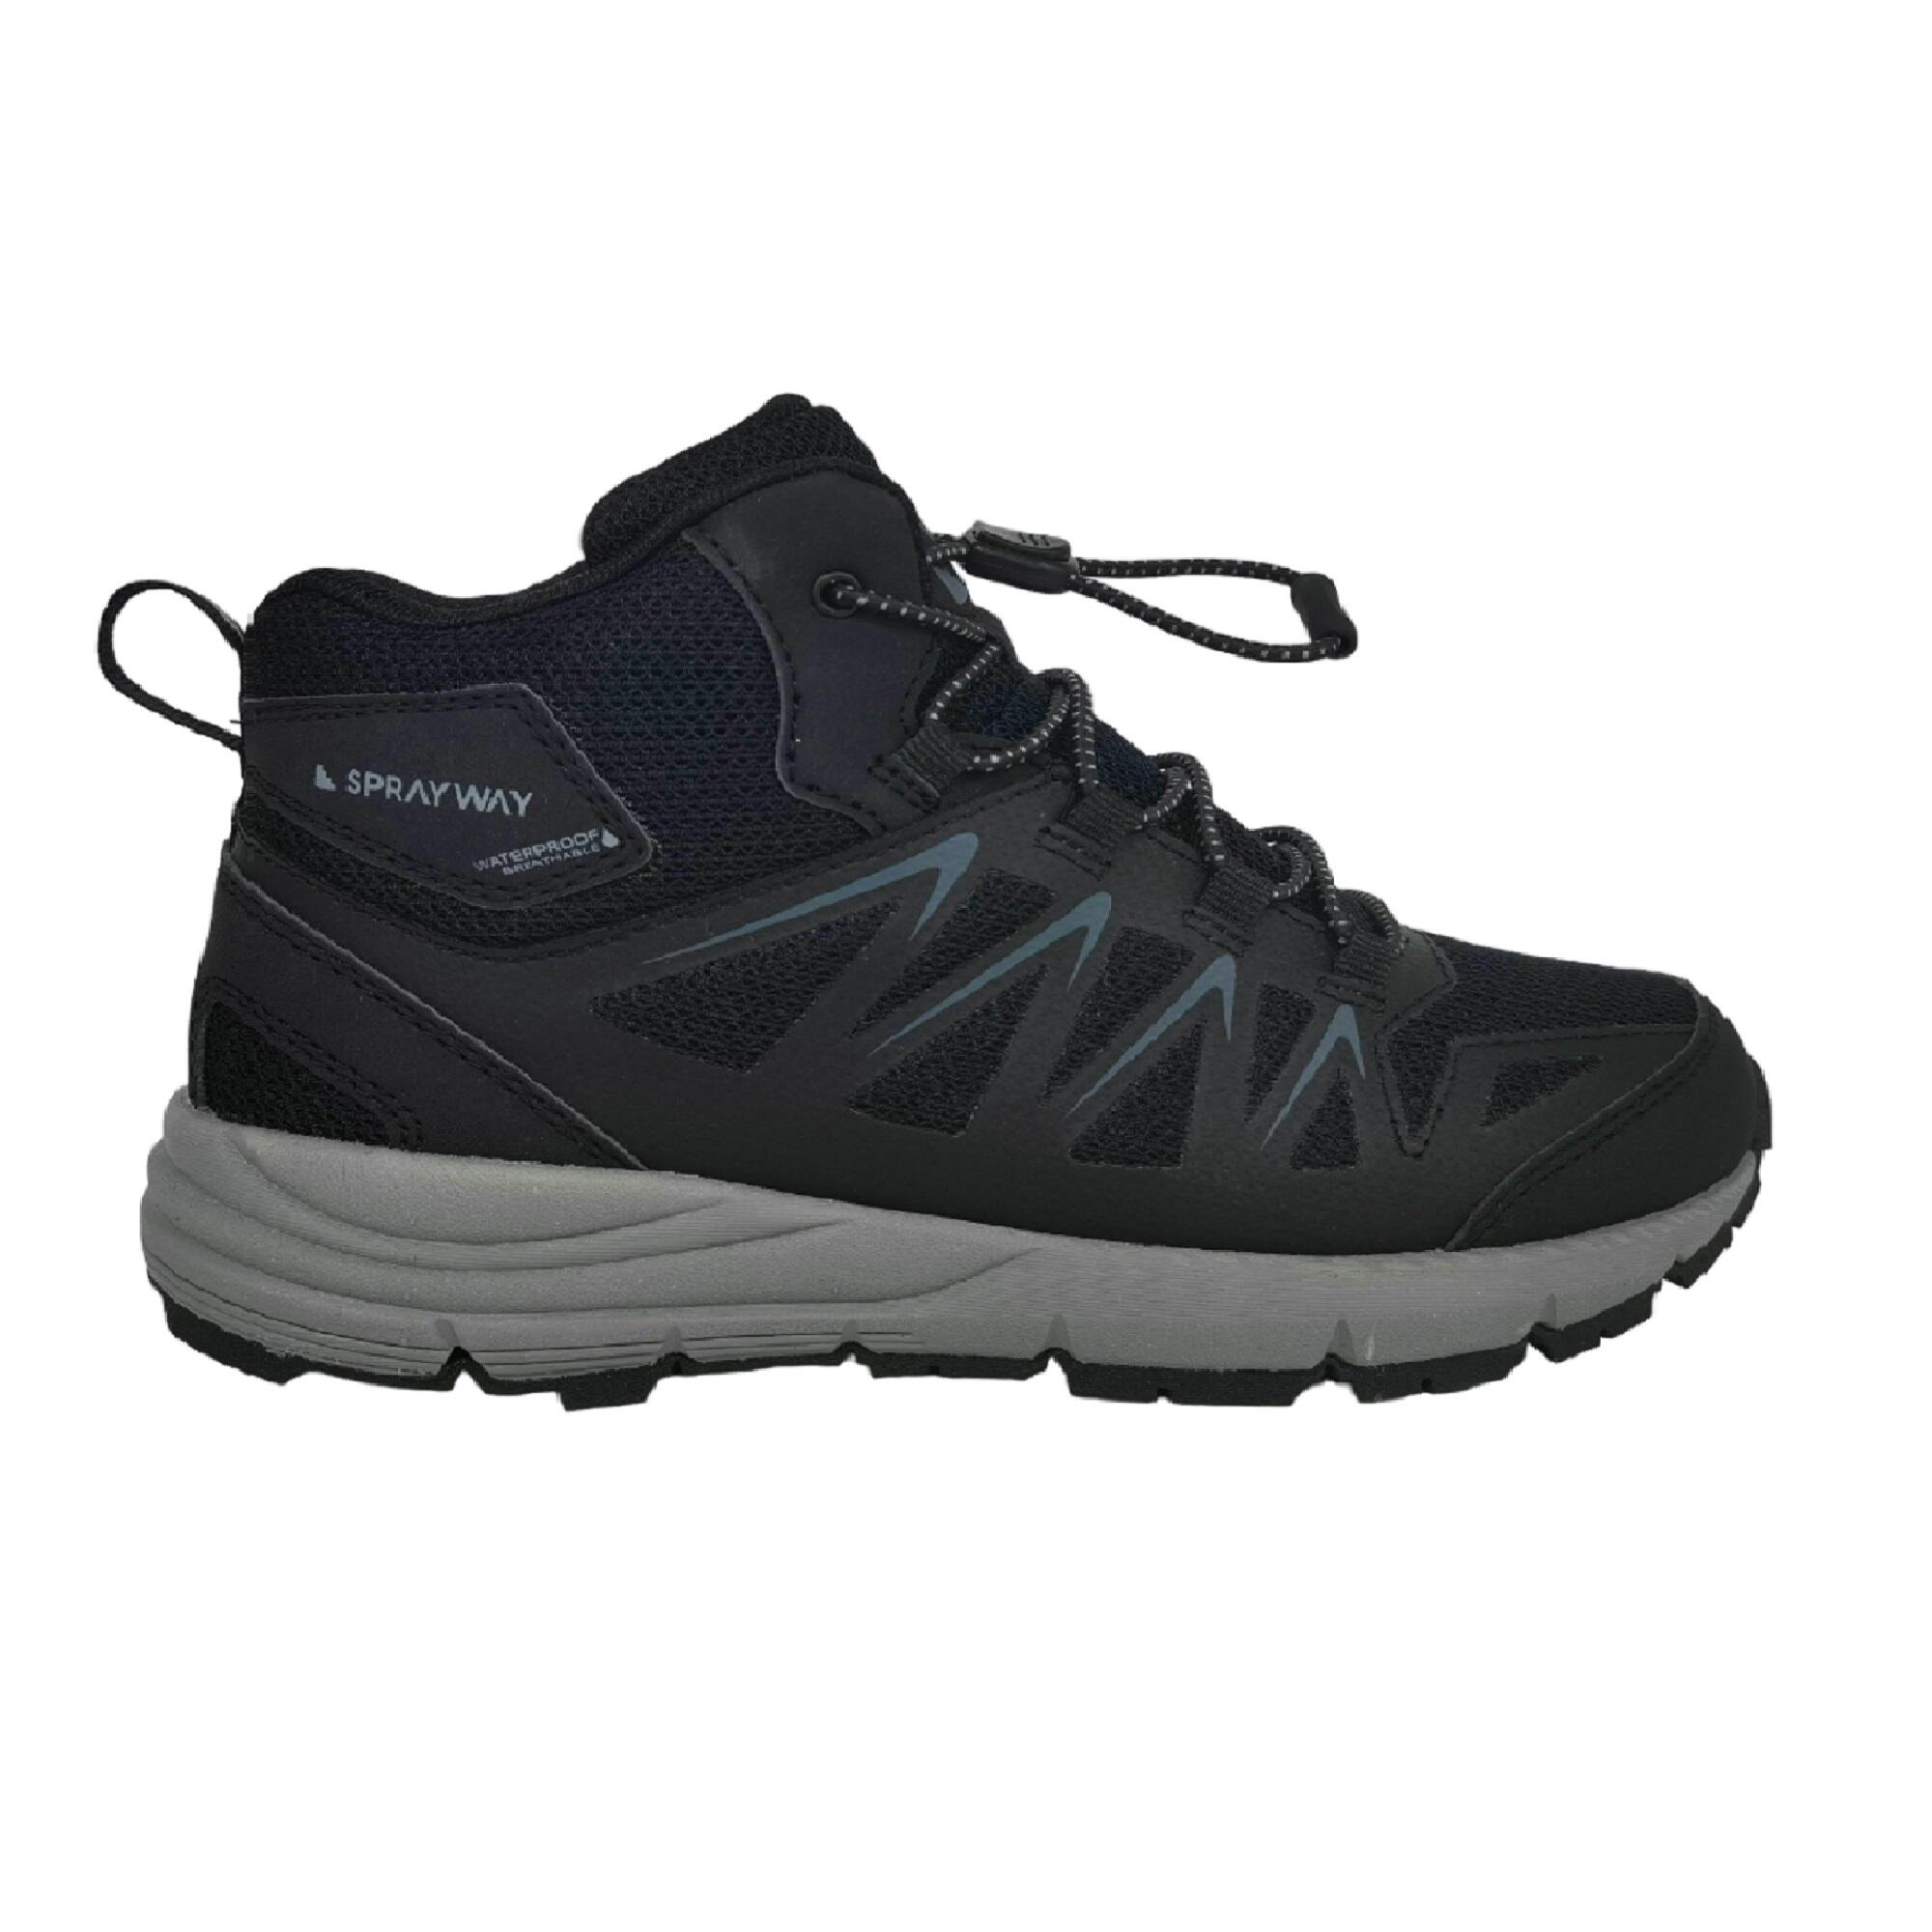 Junior waterproof leather boots - Sprayway Stanage Mid - Black 1/1